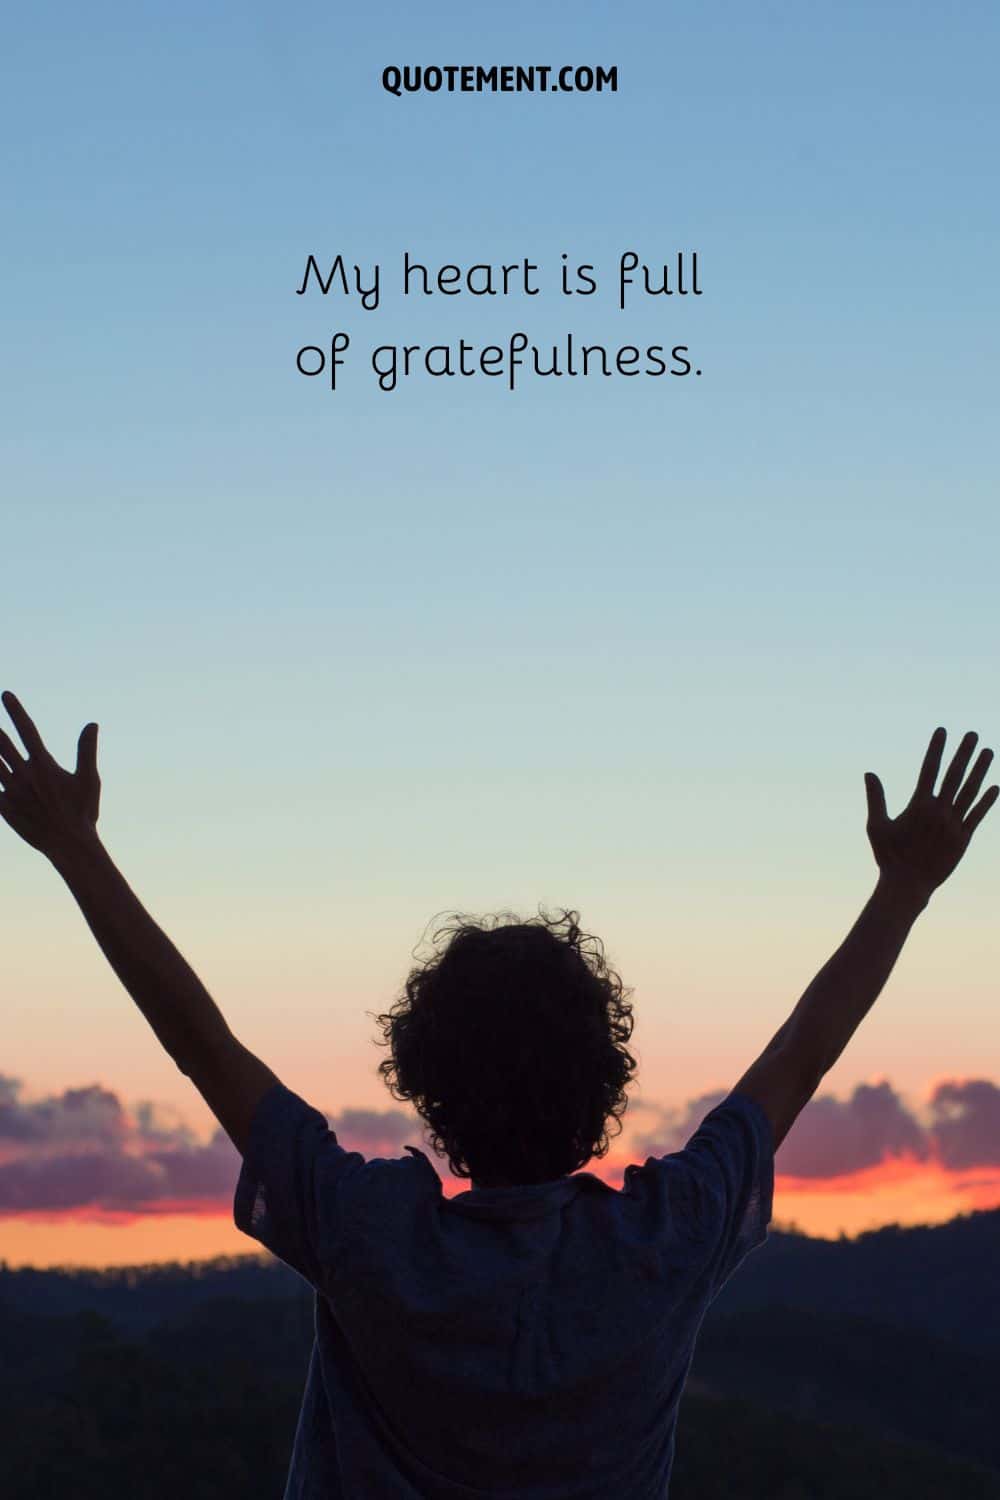 a person with raised hands image representing morning gratitude affirmation
